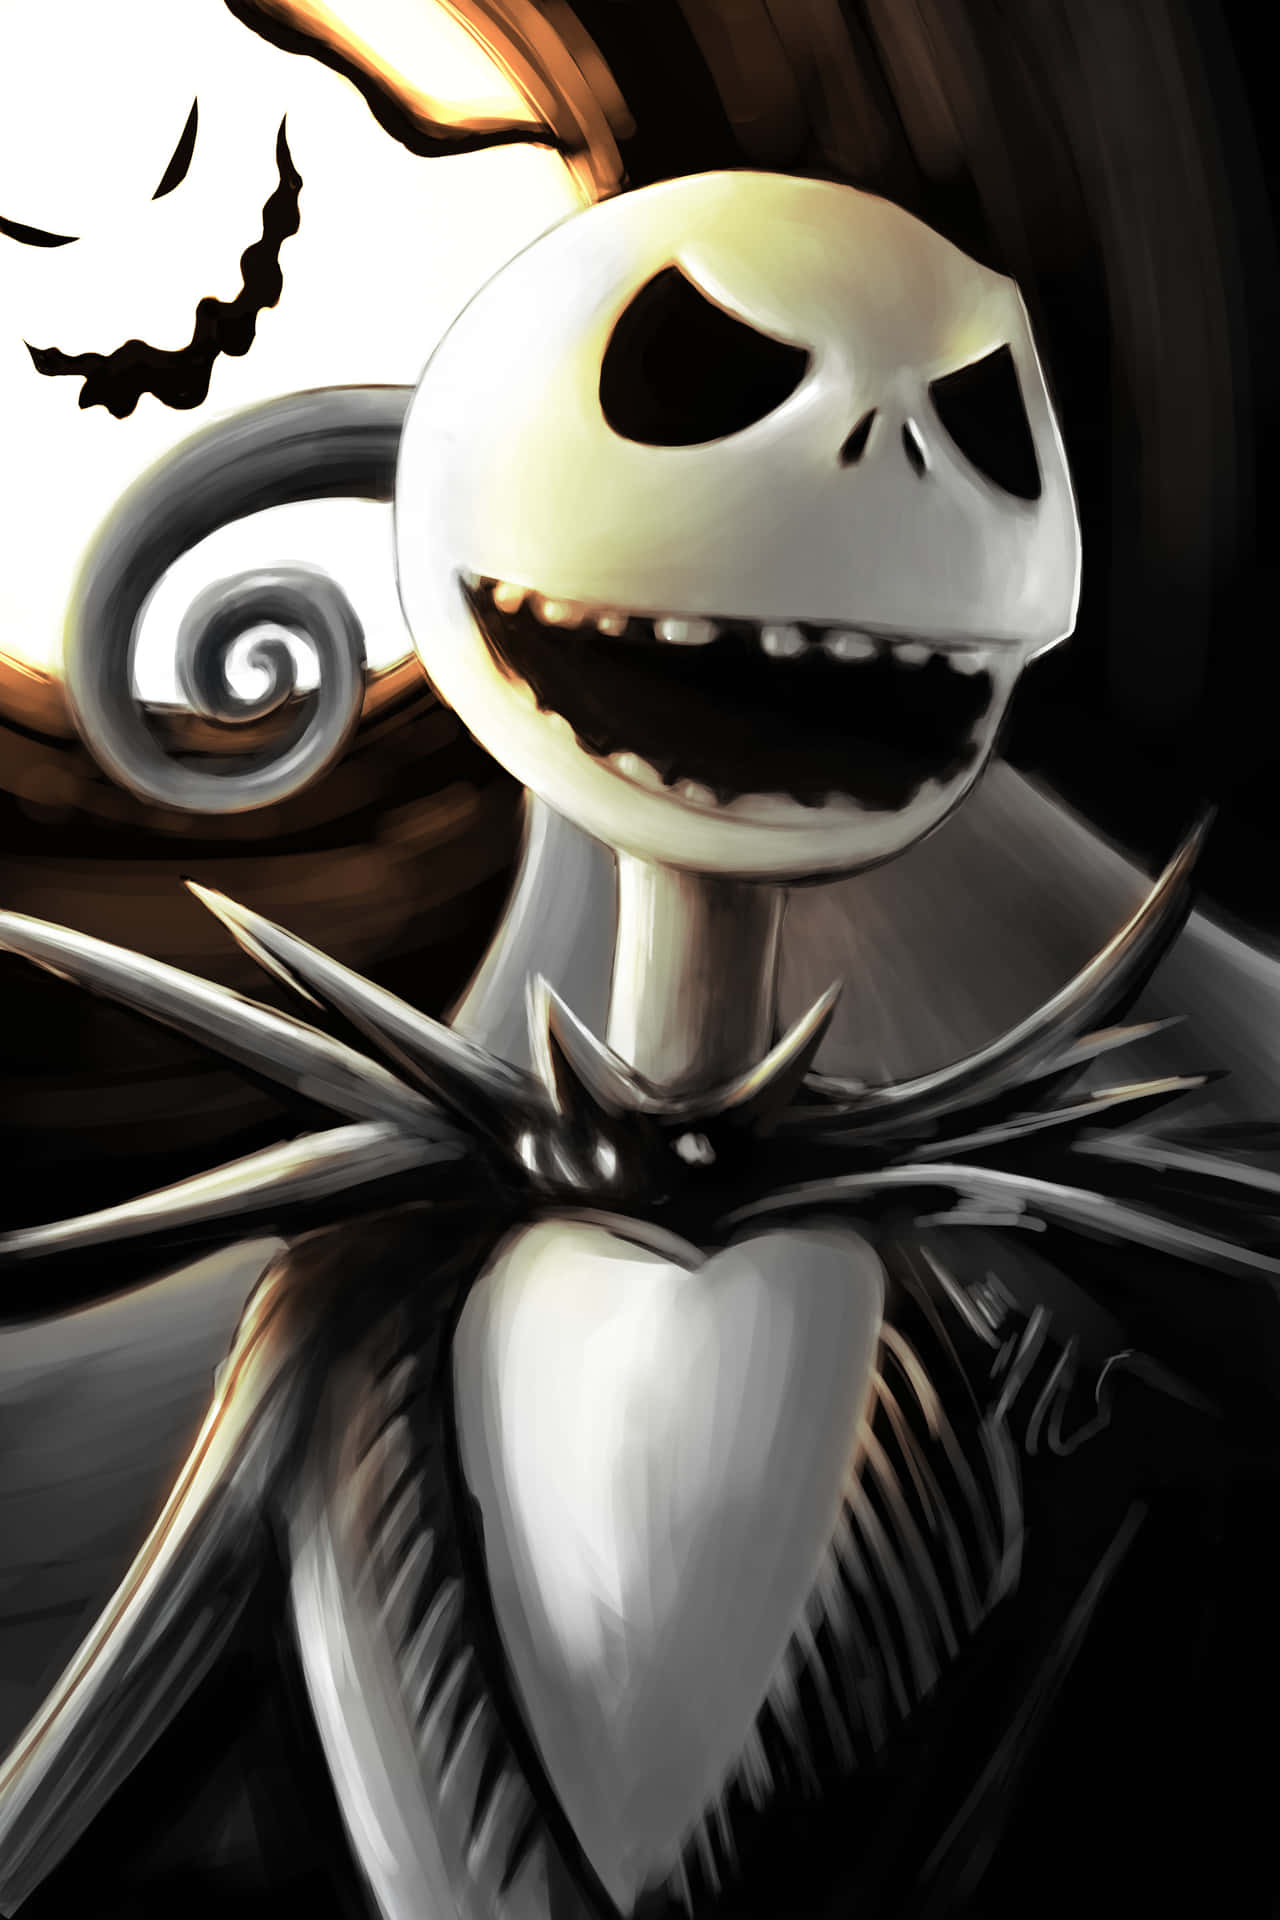 Image  Jack Skellington, Character From The Classic Tim Burton Movie “The Nightmare Before Christmas”